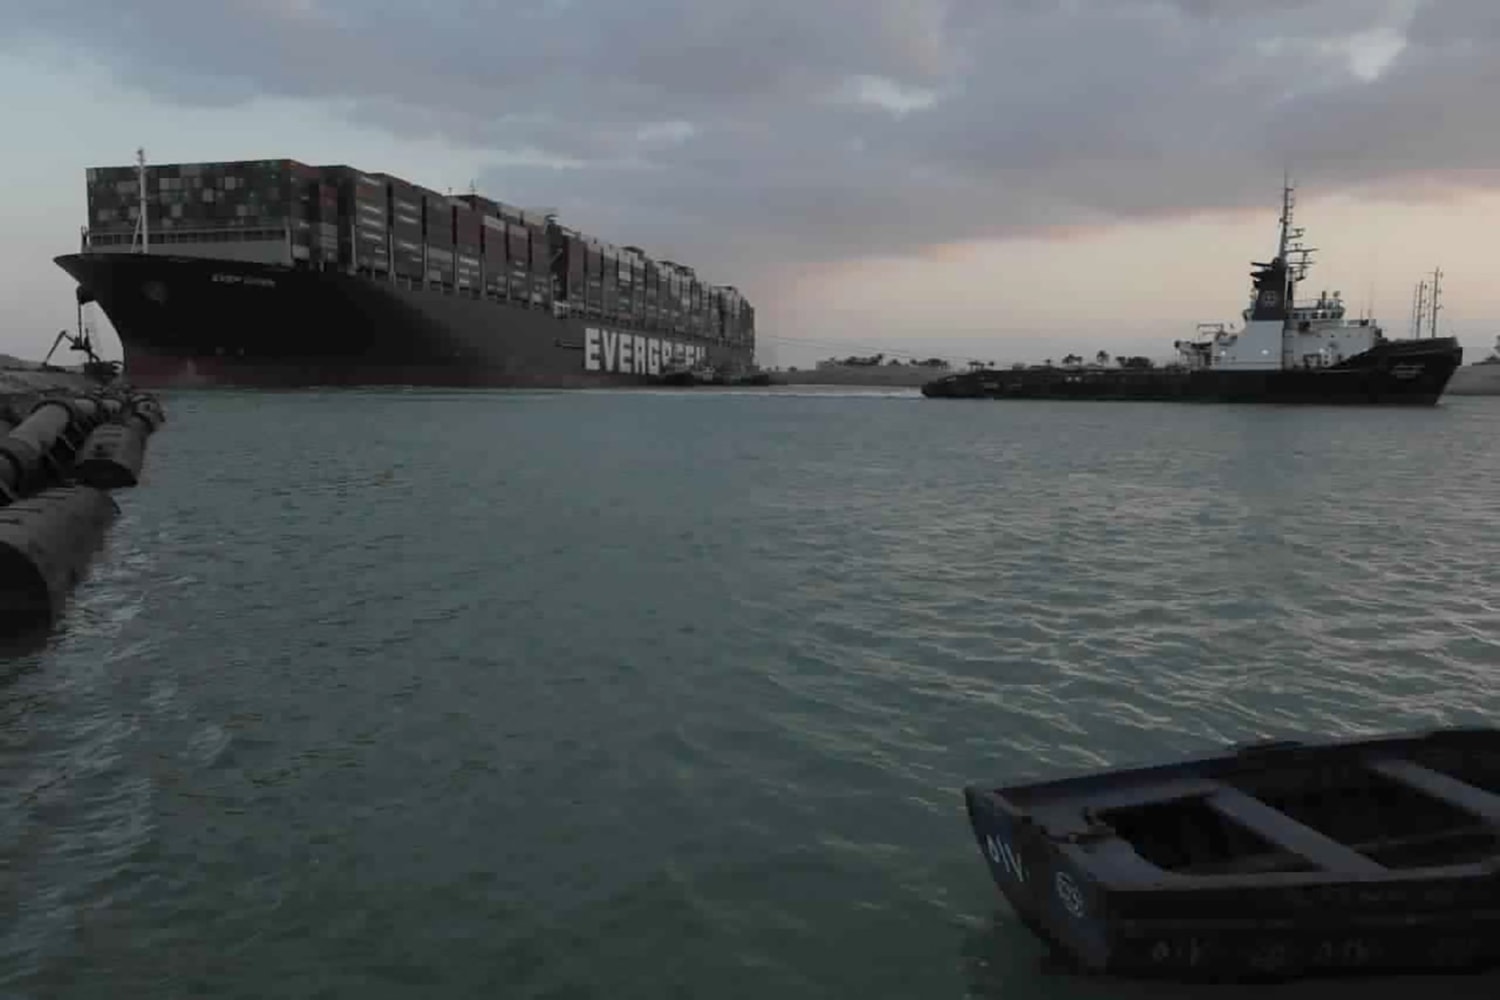 Videos and photos of damage to Ever Given ship after Suez Canal